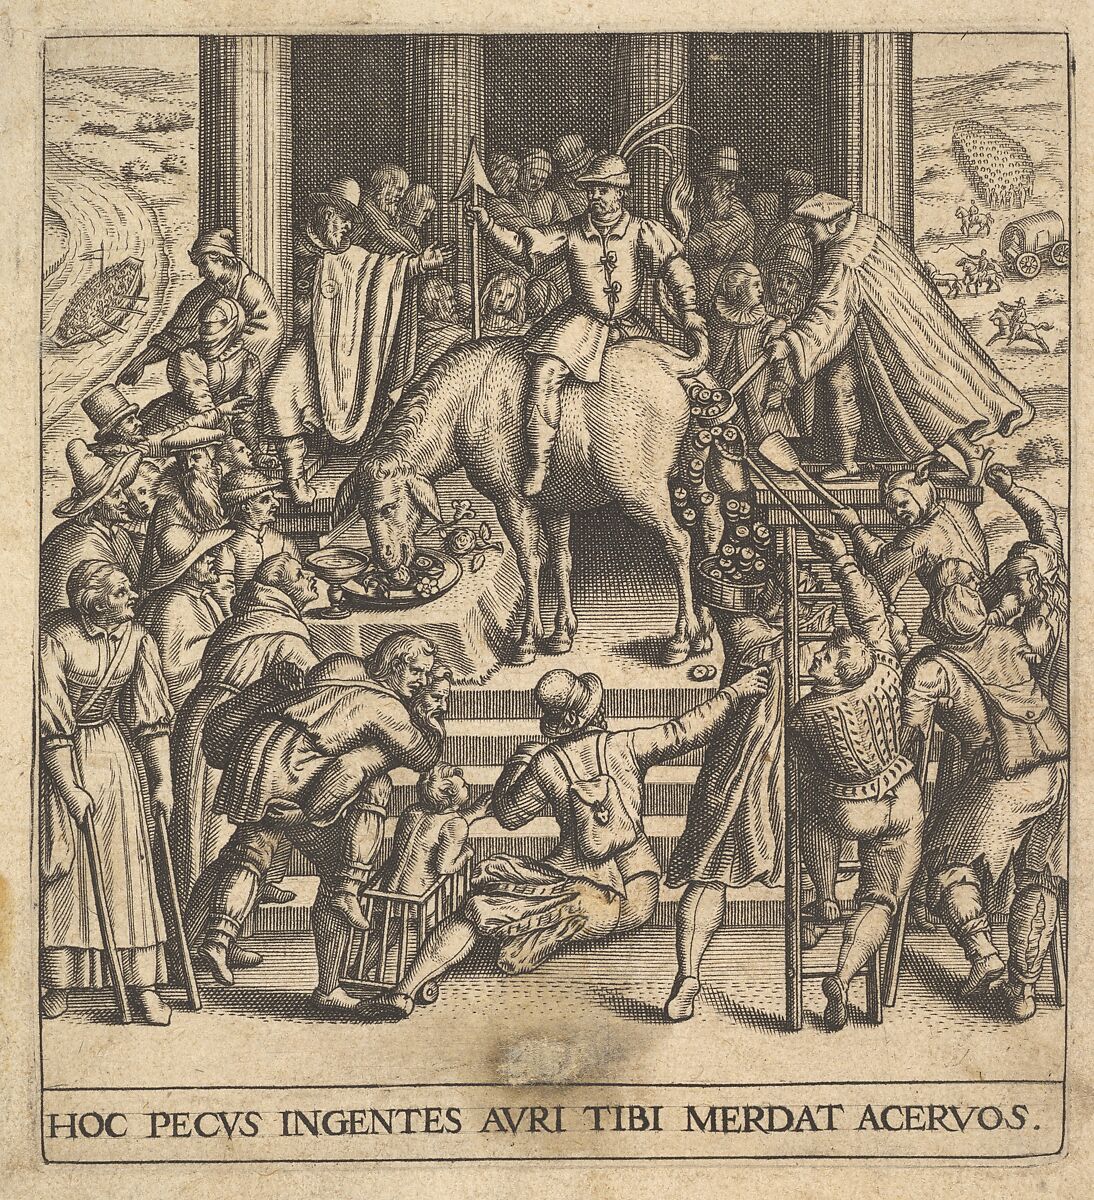 Men collecting dung dropping from the hindquarters of a mule, with a rider sitting backward on the mule and holding its tail aside, surrounded by onlookers spread around a stepped platform, from 'Secular emblems' (Emblemata saecularia), Johann Theodor de Bry (Netherlandish, Strasbourg 1561–1623 Bad Schwalbach), Engraving 